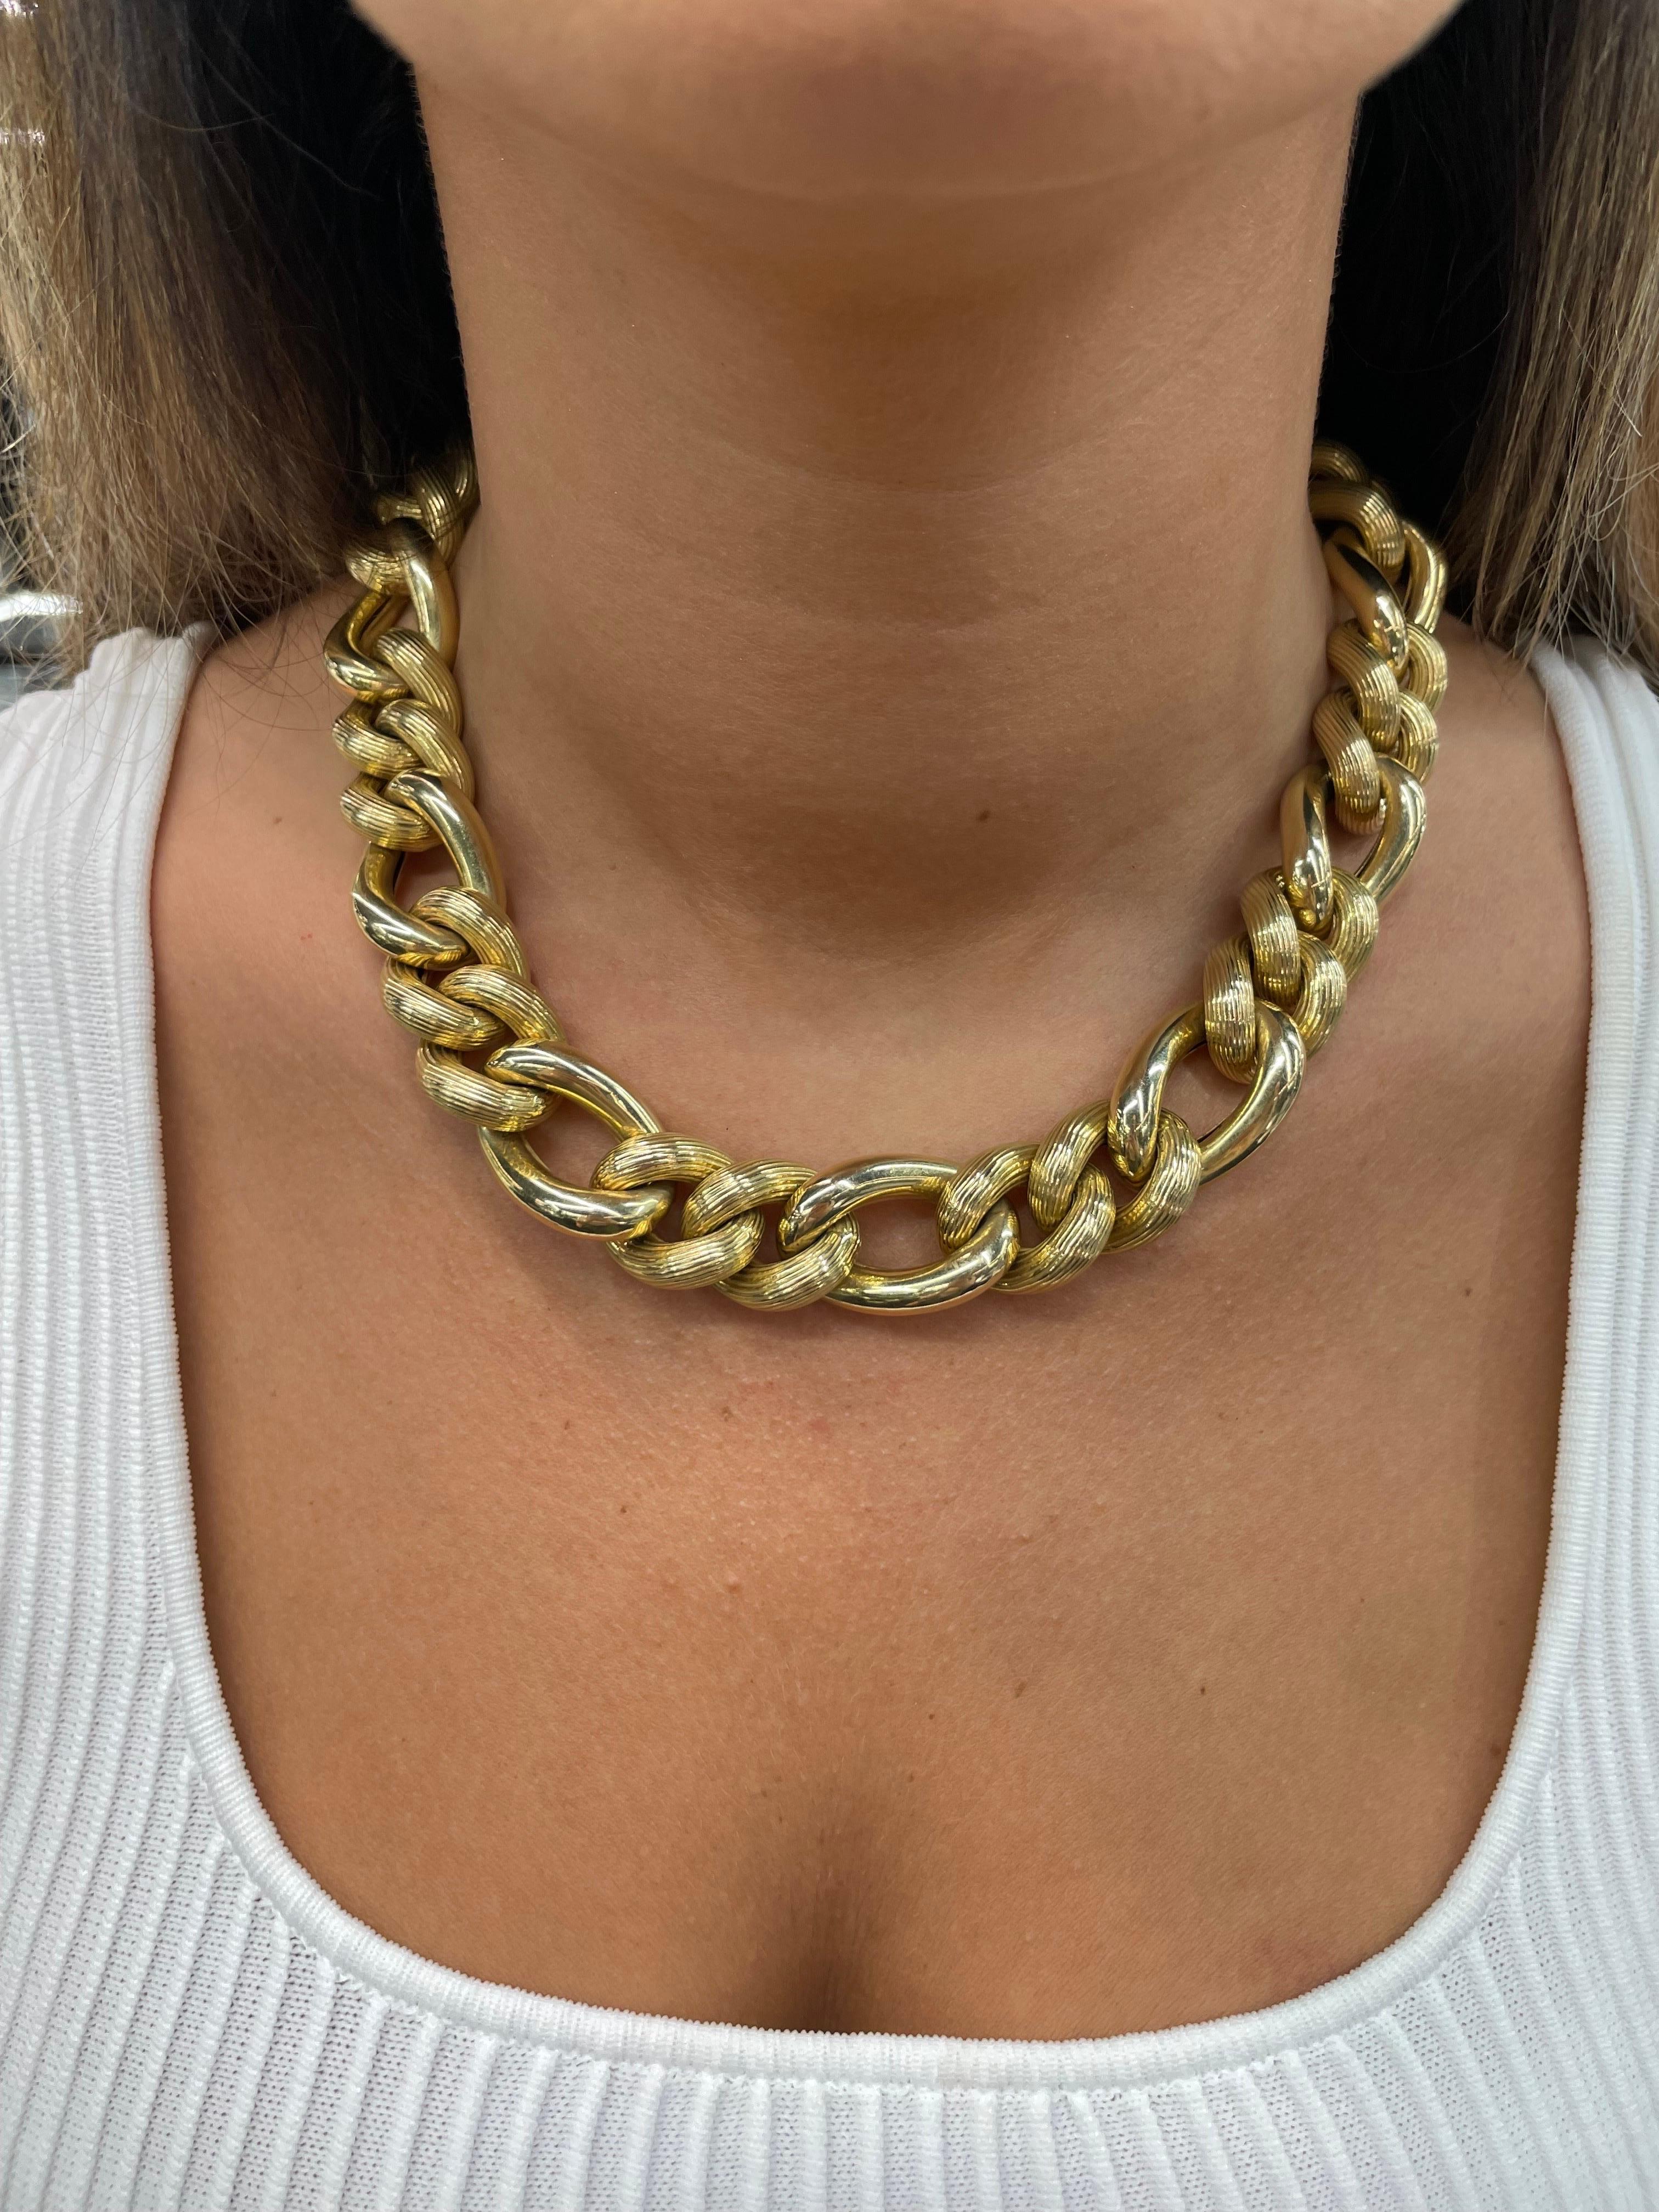 Bold 14 Karat Yellow Gold necklace featuring 34 Figaro large links weighing 139 grams. 
Great conversation piece! 